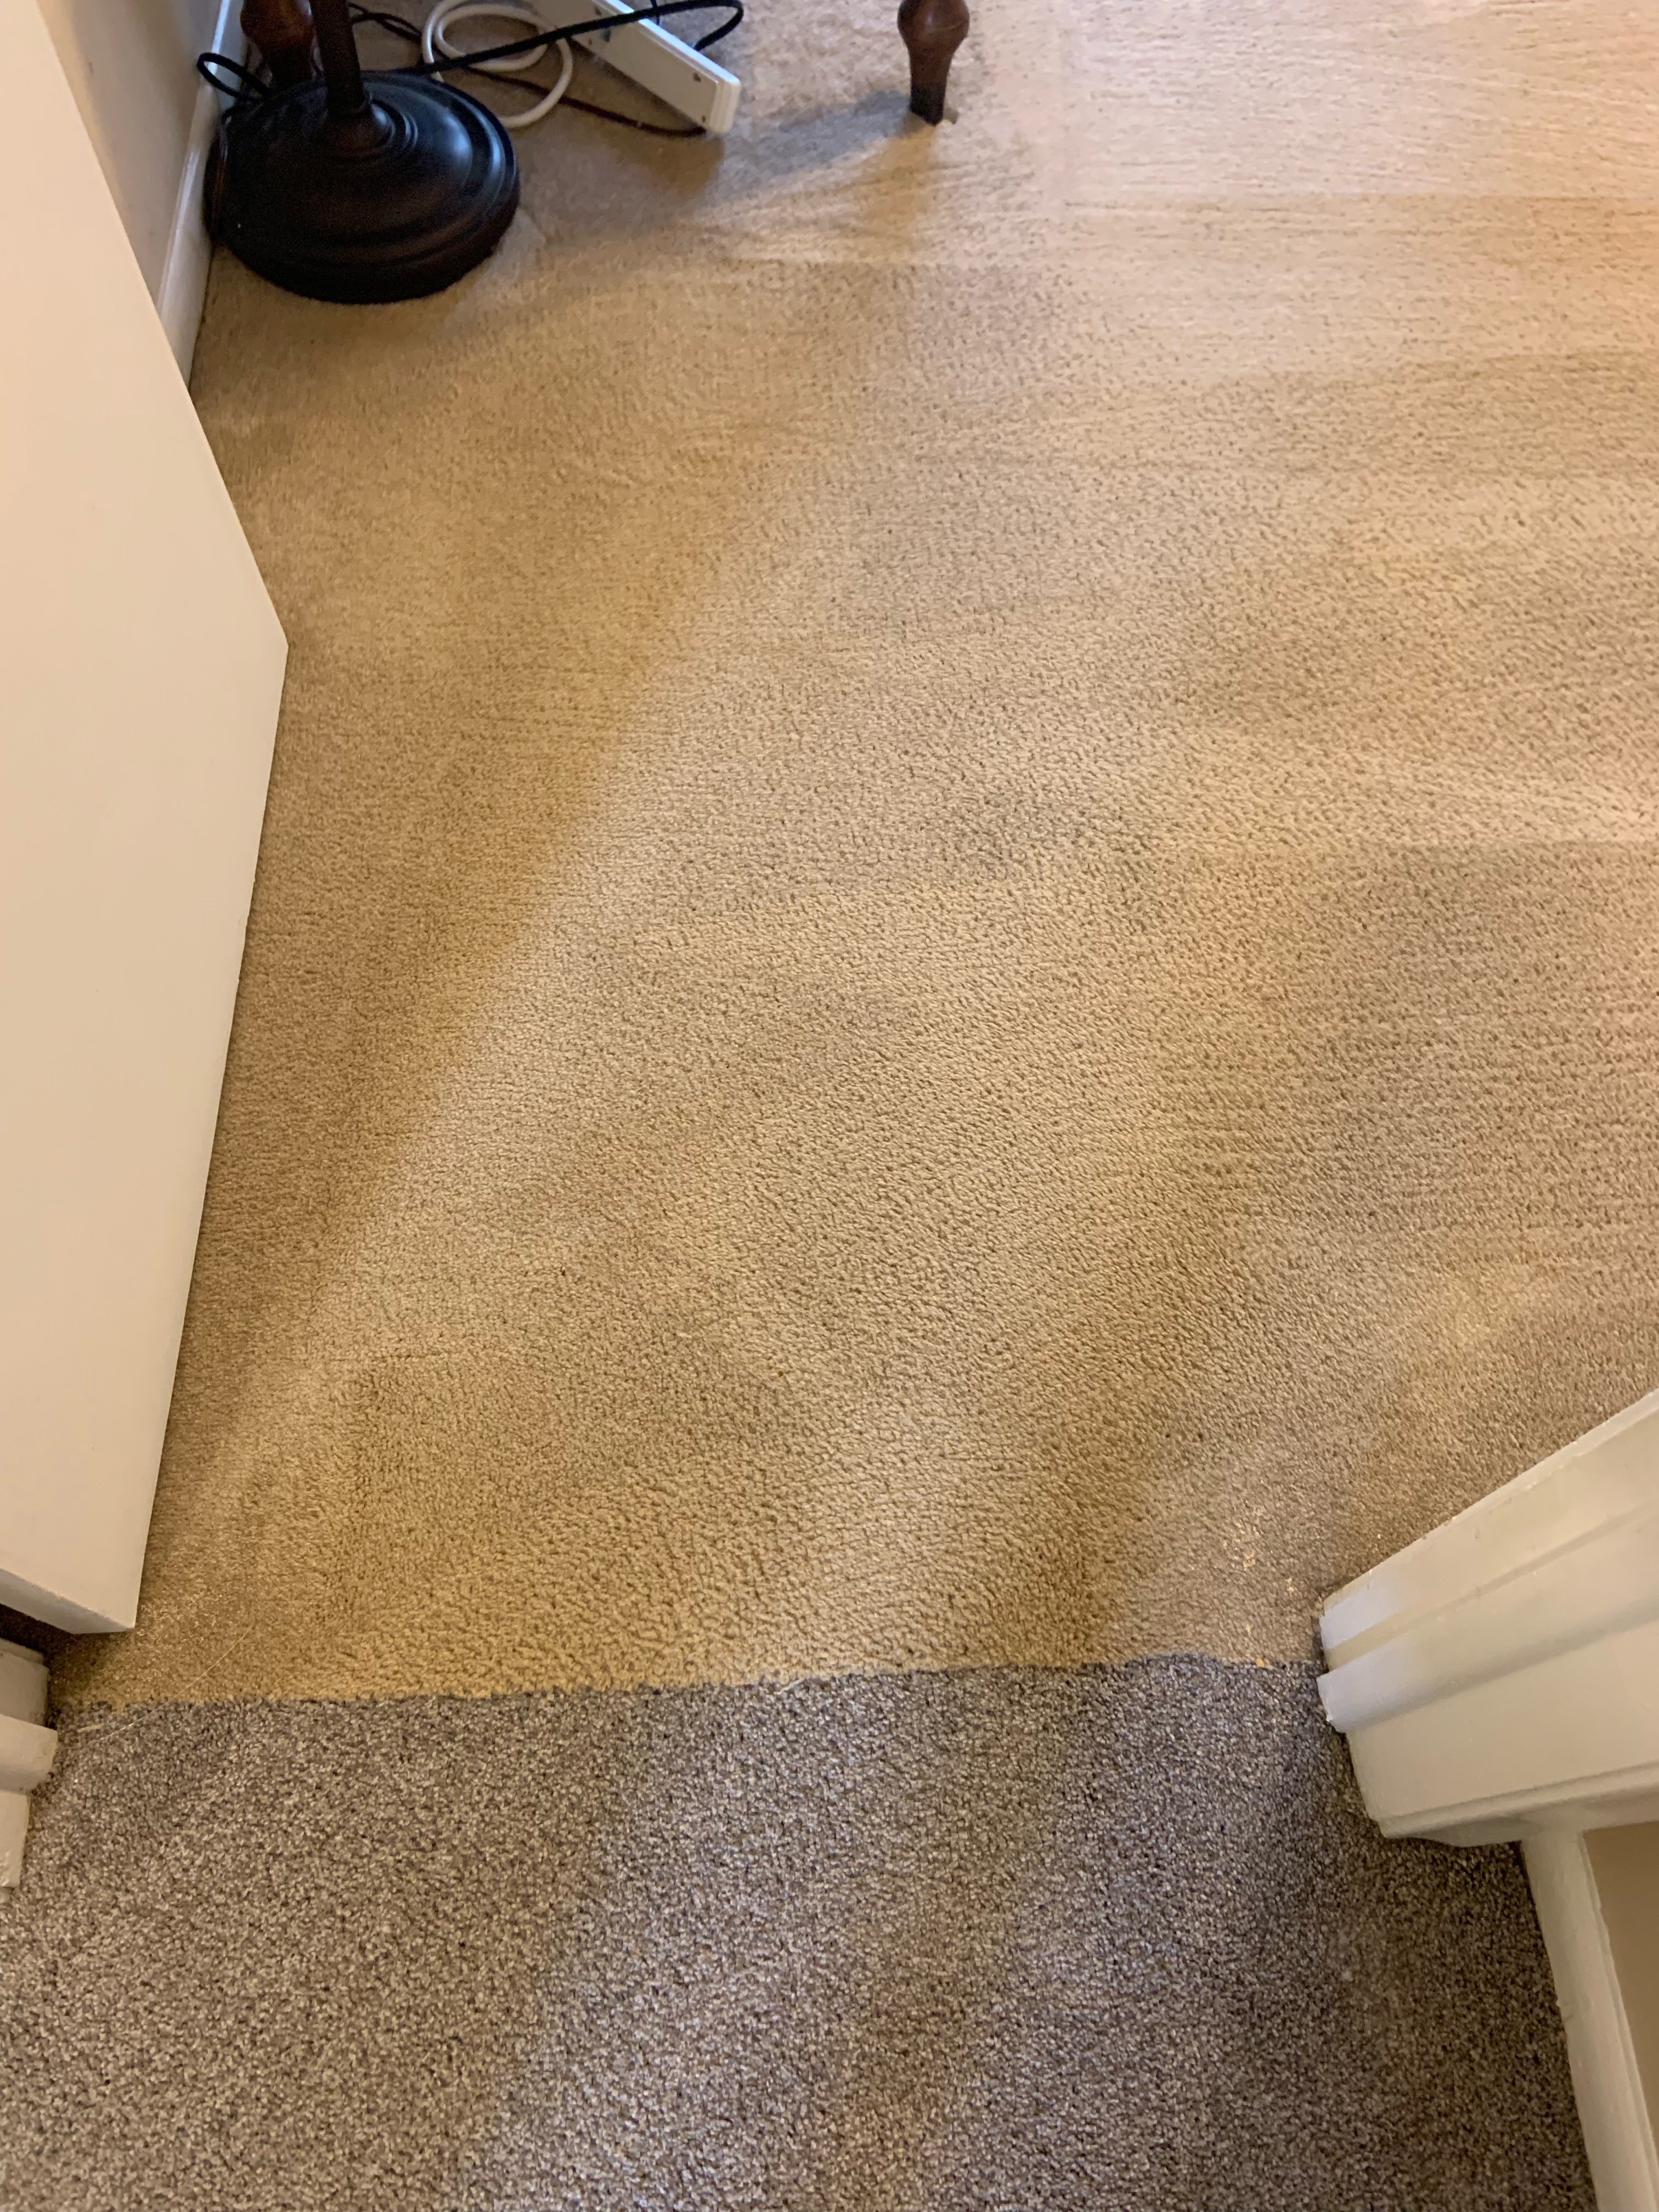 We are the top choice for dry carpet cleaning in and around New Albany, Ohio!  We also clean tile, g Brilliant Dry Carpet Care Columbus (614)591-4494